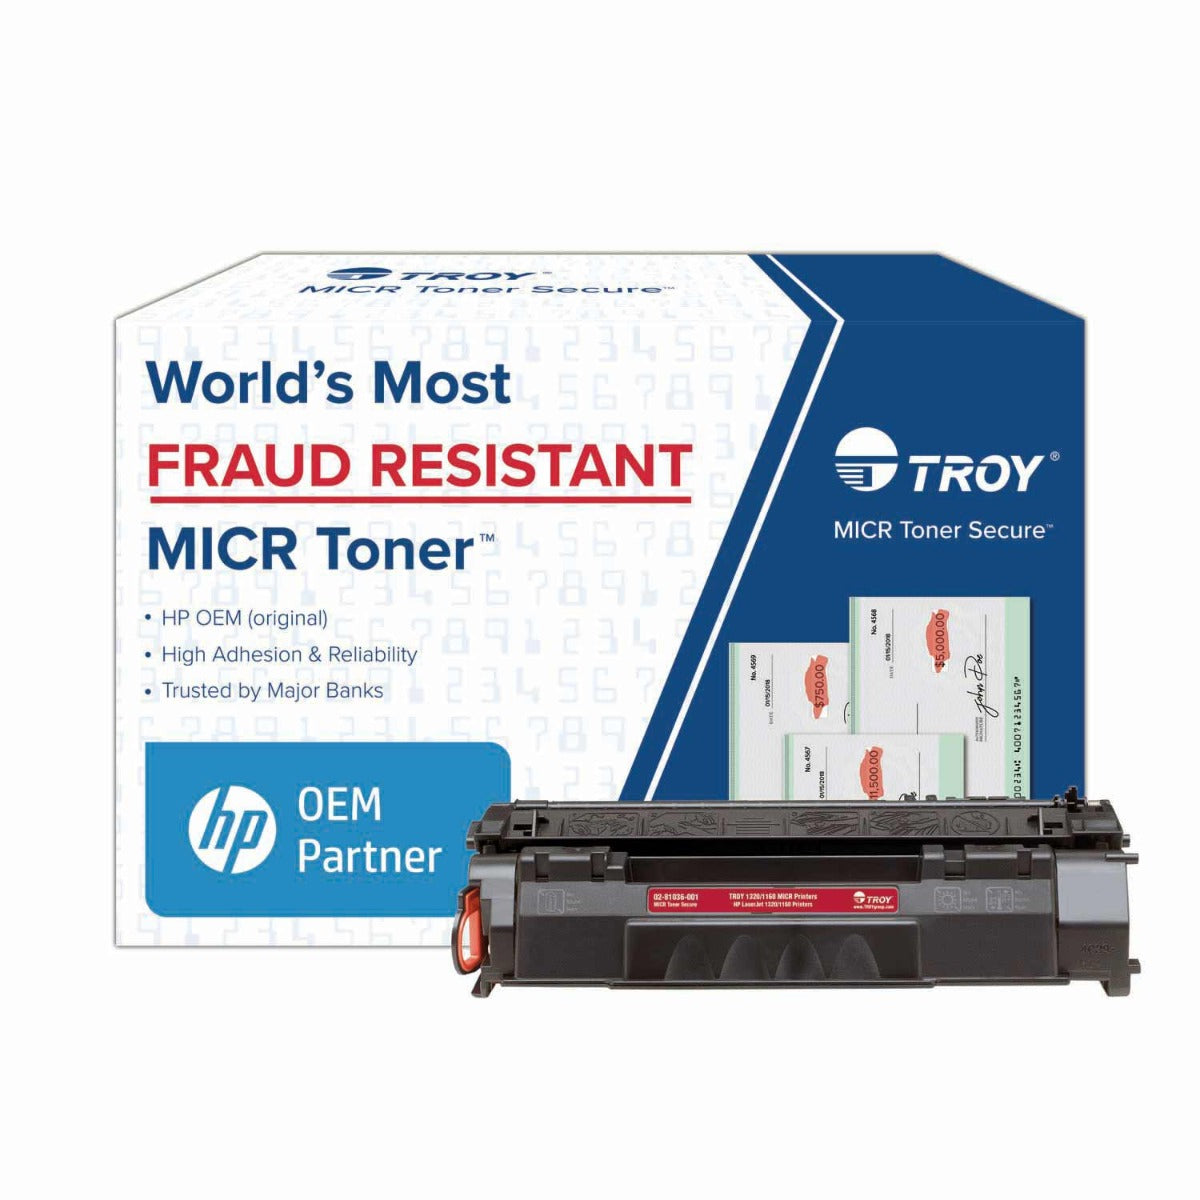 TROY 1320/1160 MICR Toner Secure Standard Yield Cartridge (Coordinating HP Part Number: Q5949A)